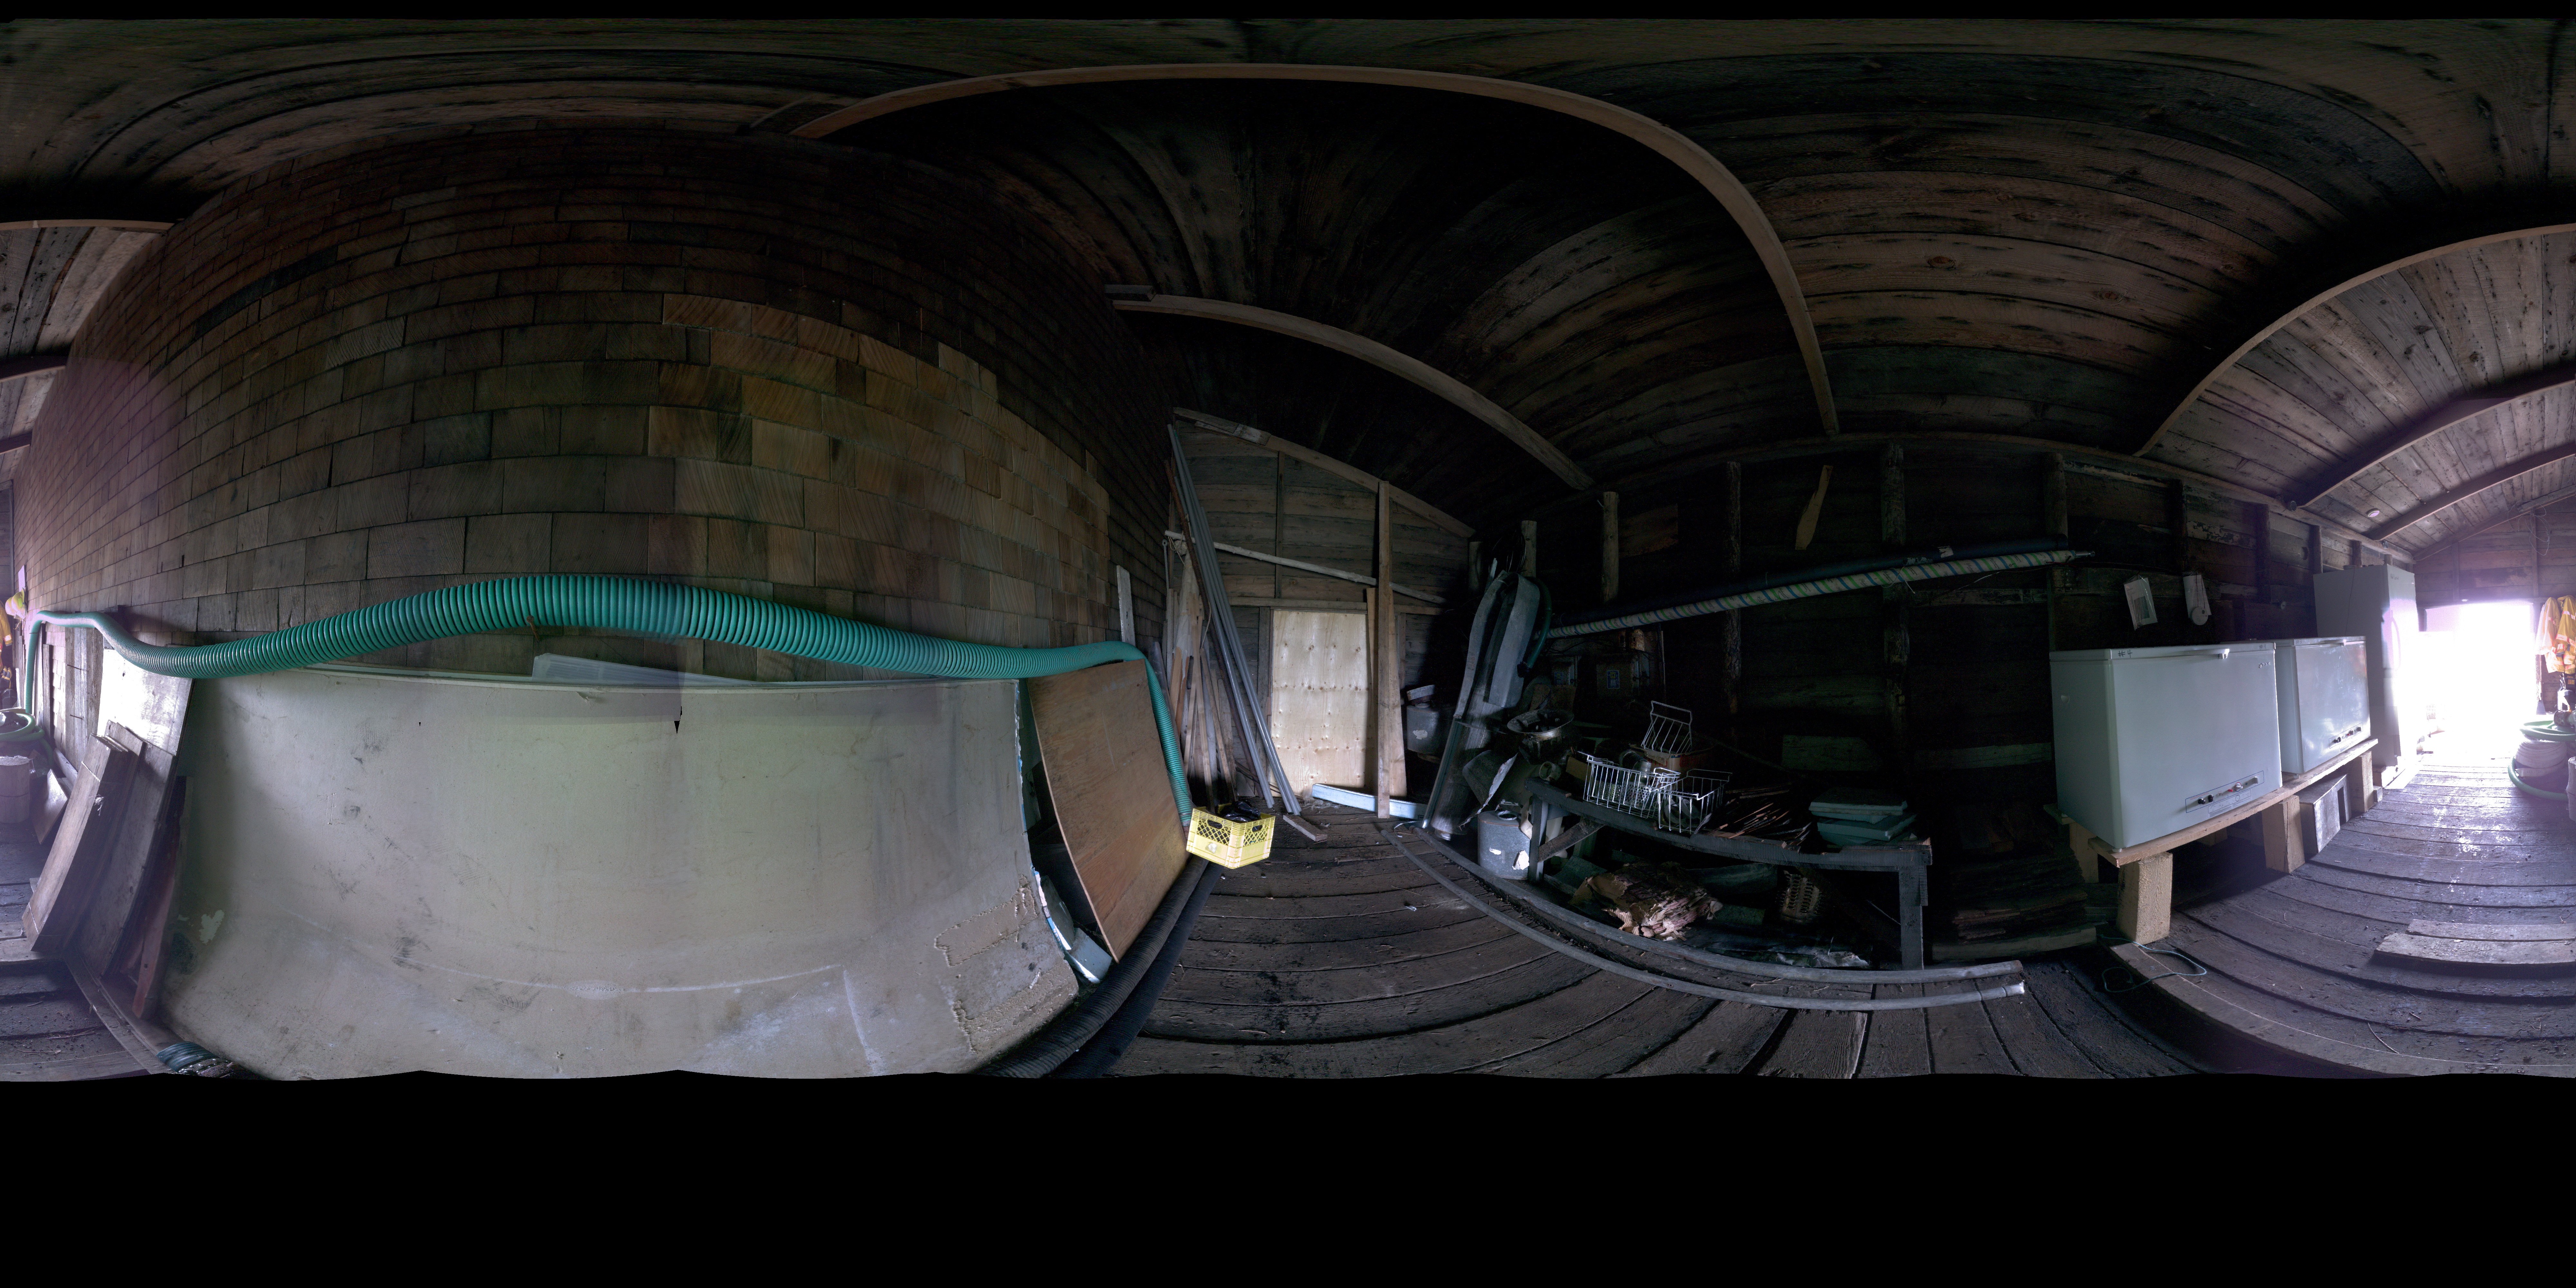 Panoramic view of the Pacific Steam Whaling Co. Bonehouse interior from the Leica BKL 360, scanning location 2